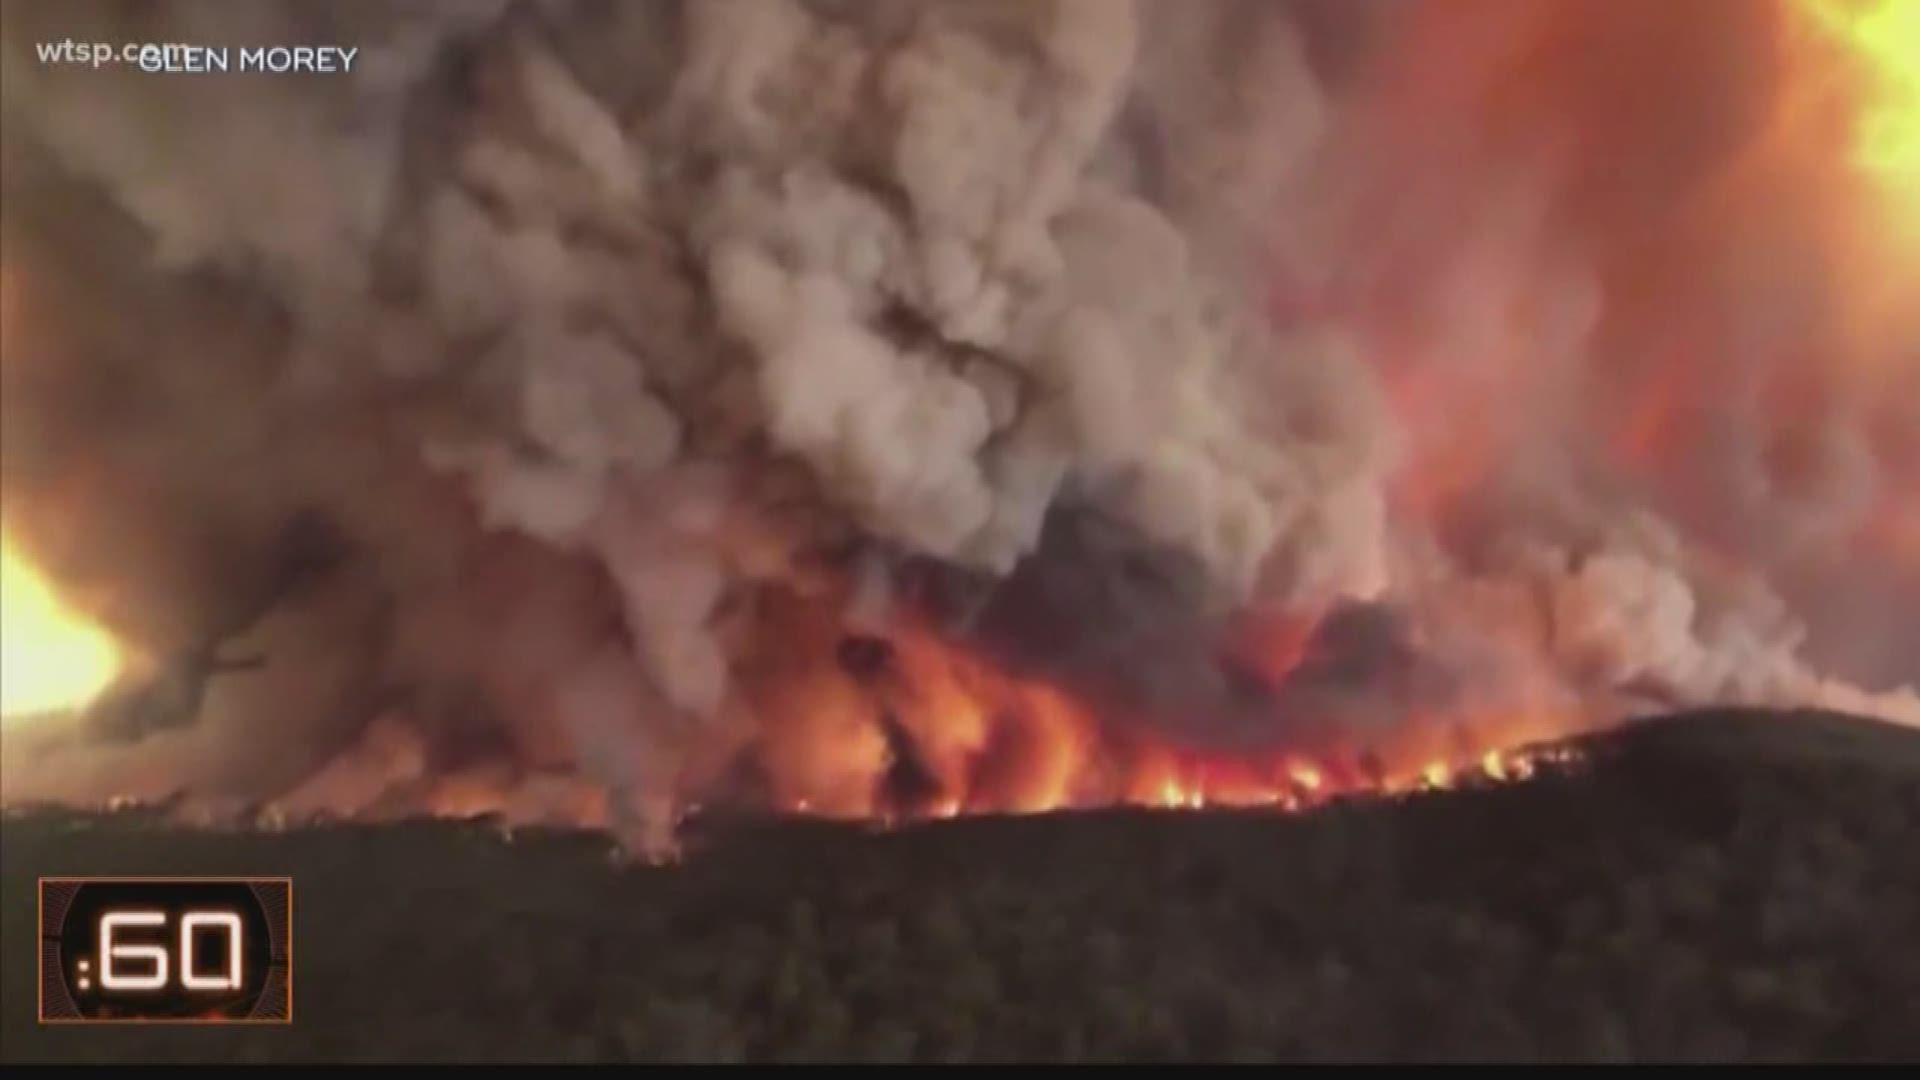 A look at the brushfires that have burned millions of acres in Australia.